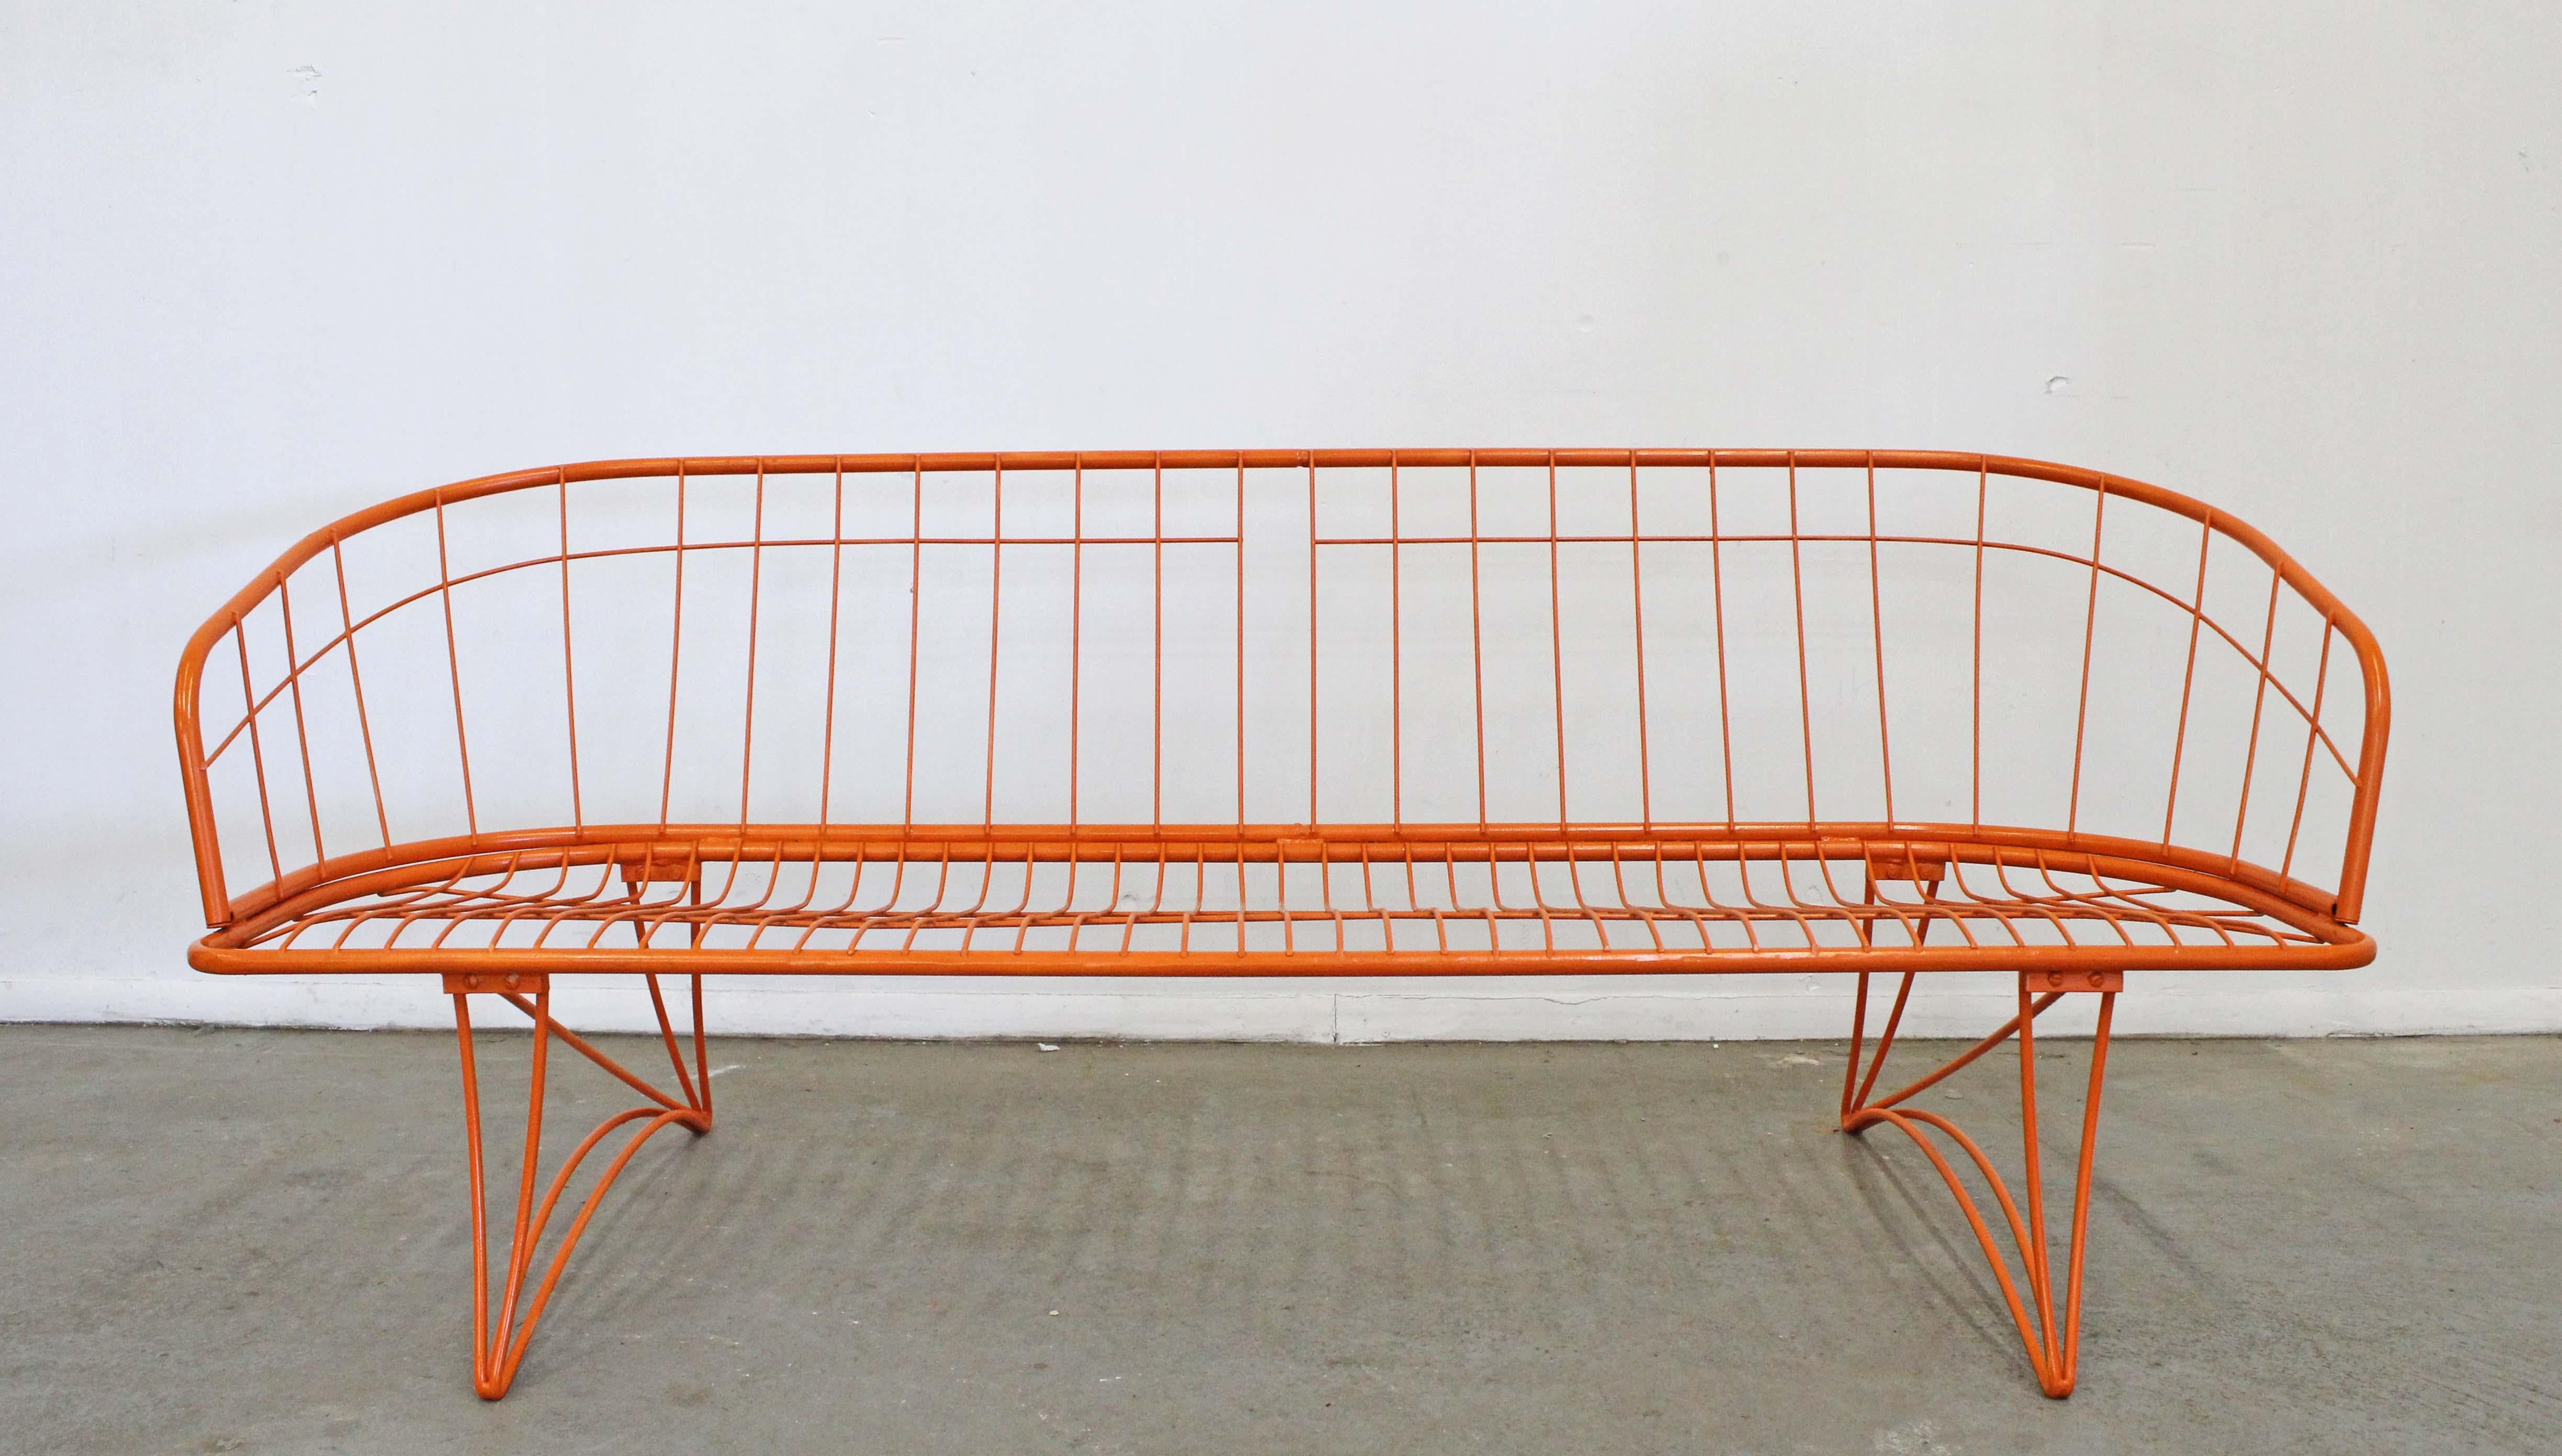 What a find. Offered is a midcentury wrought iron outdoor/patio 'Grenada' sofa made by Homecrest Bottemiller, circa 1968. This piece has been repainted in an atomic orange. It is in good condition considering its age, has new paint and includes